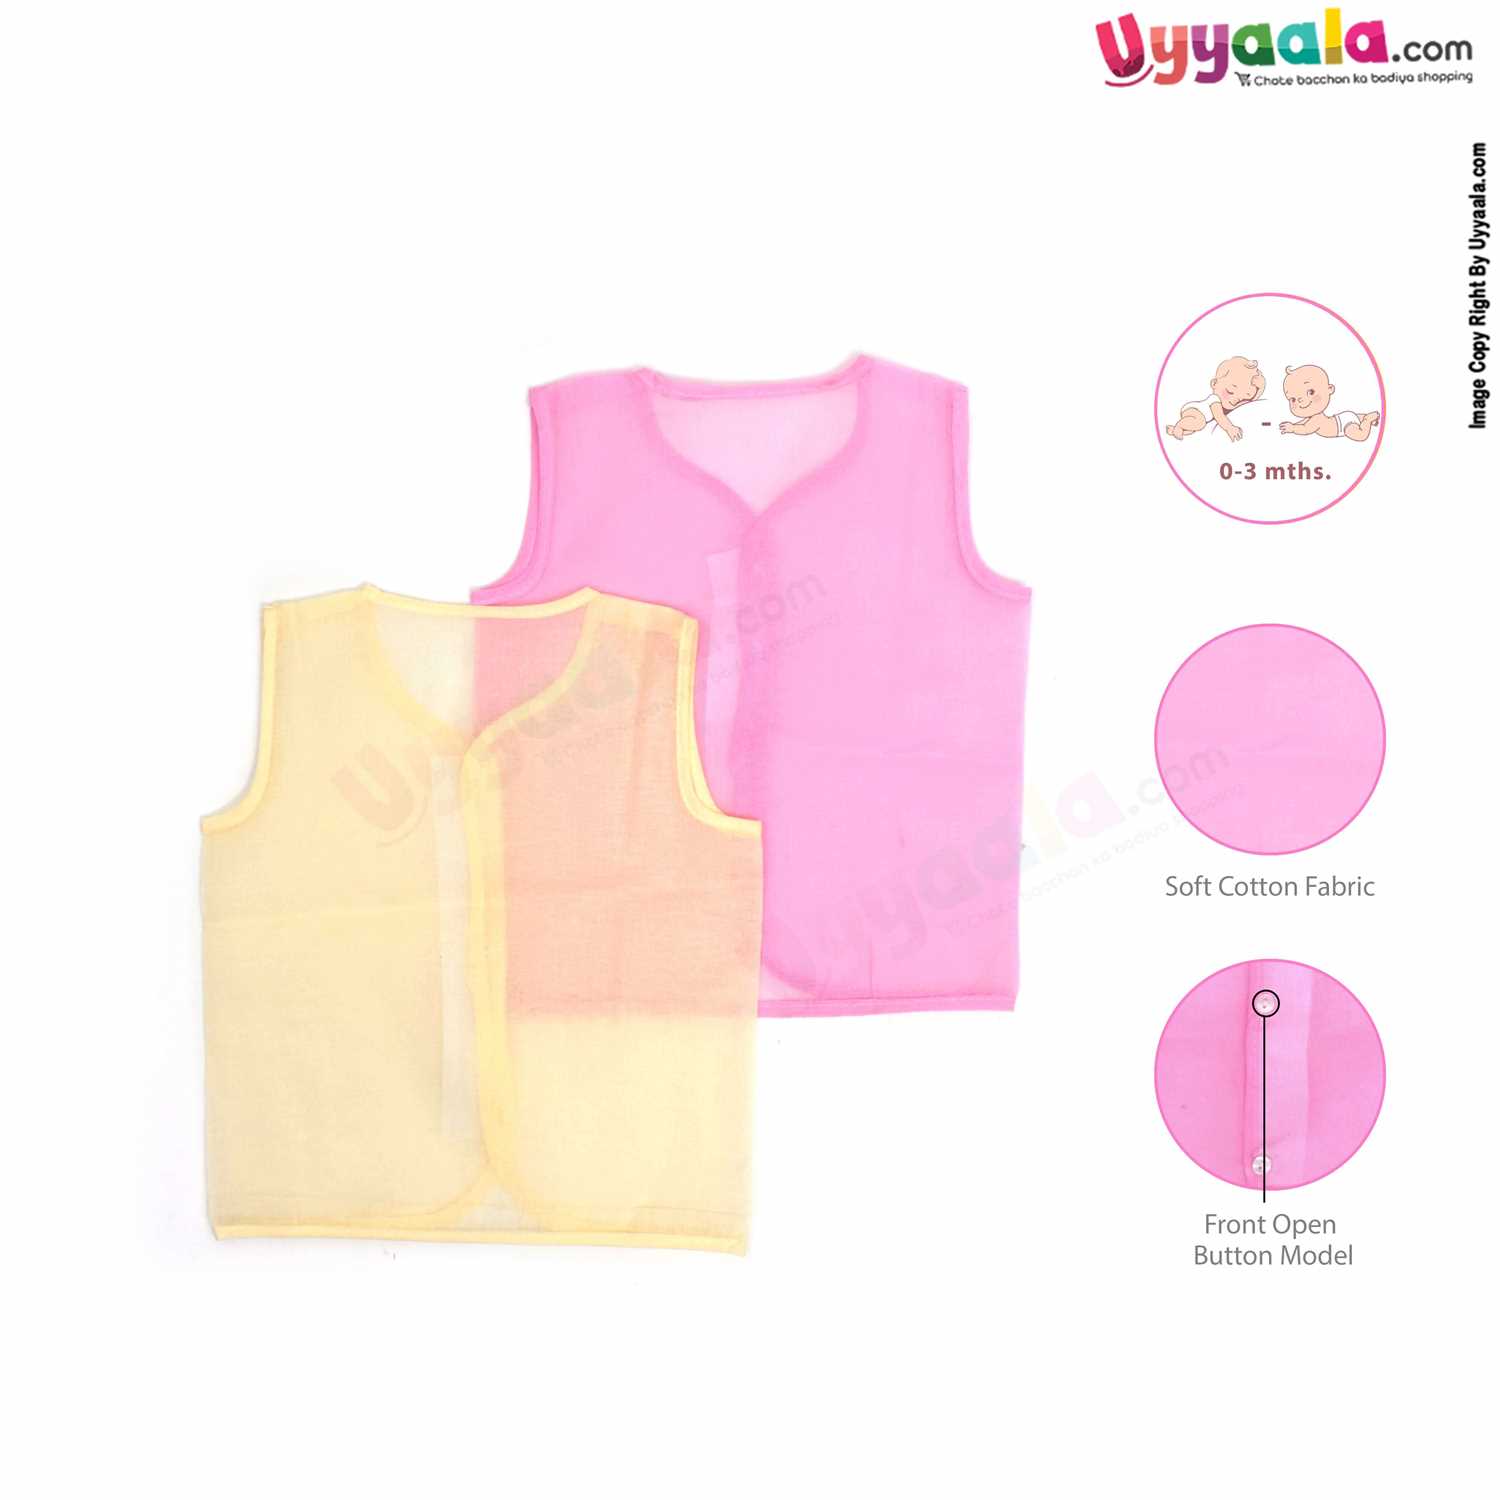 SNUG UP Sleeveless Baby Jabla Set, Front Opening Button Model, Premium Quality Cotton Baby Wear, (0-3M), 2Pack - Pink & Yellow